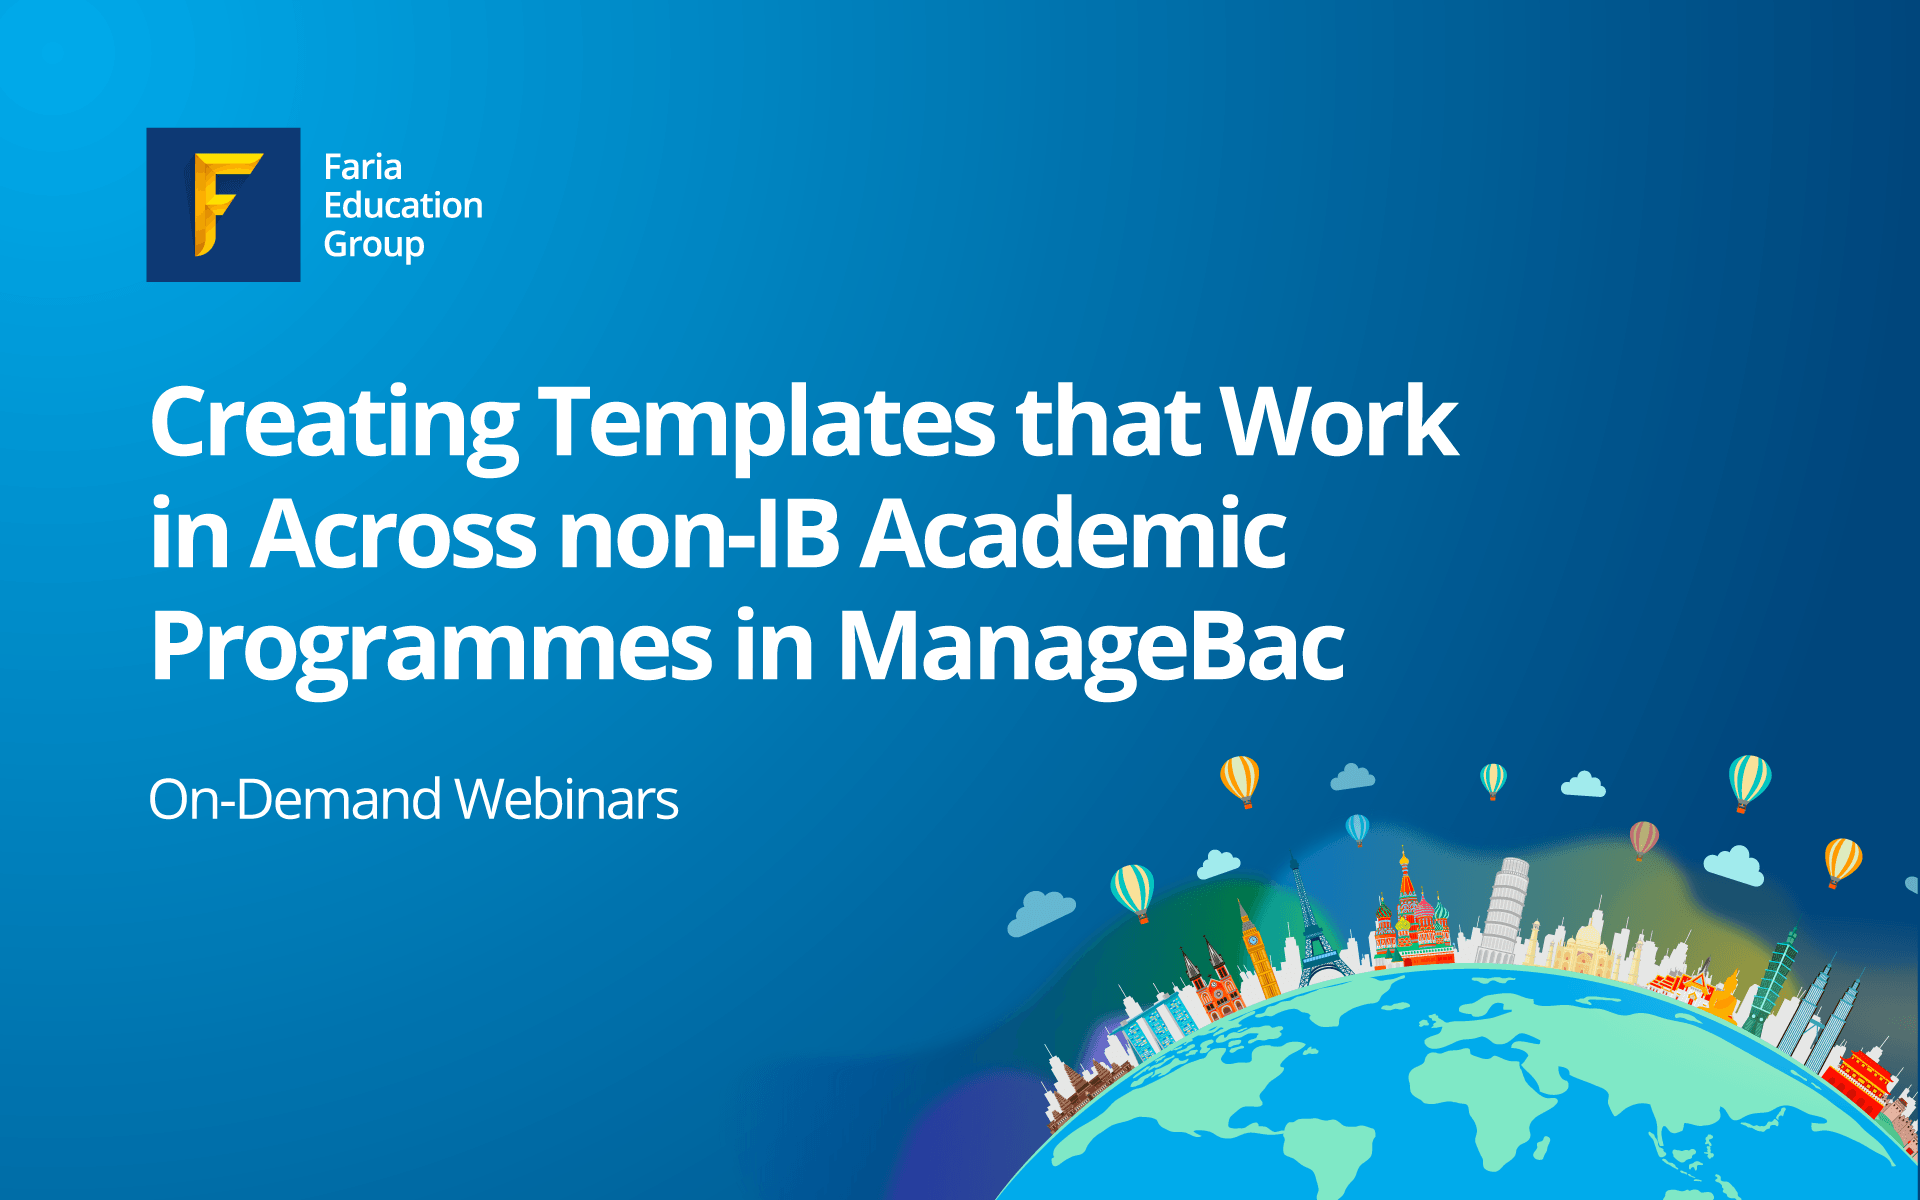 Creating Templates that Work in Across non-IB Academic Programmes in ManageBac